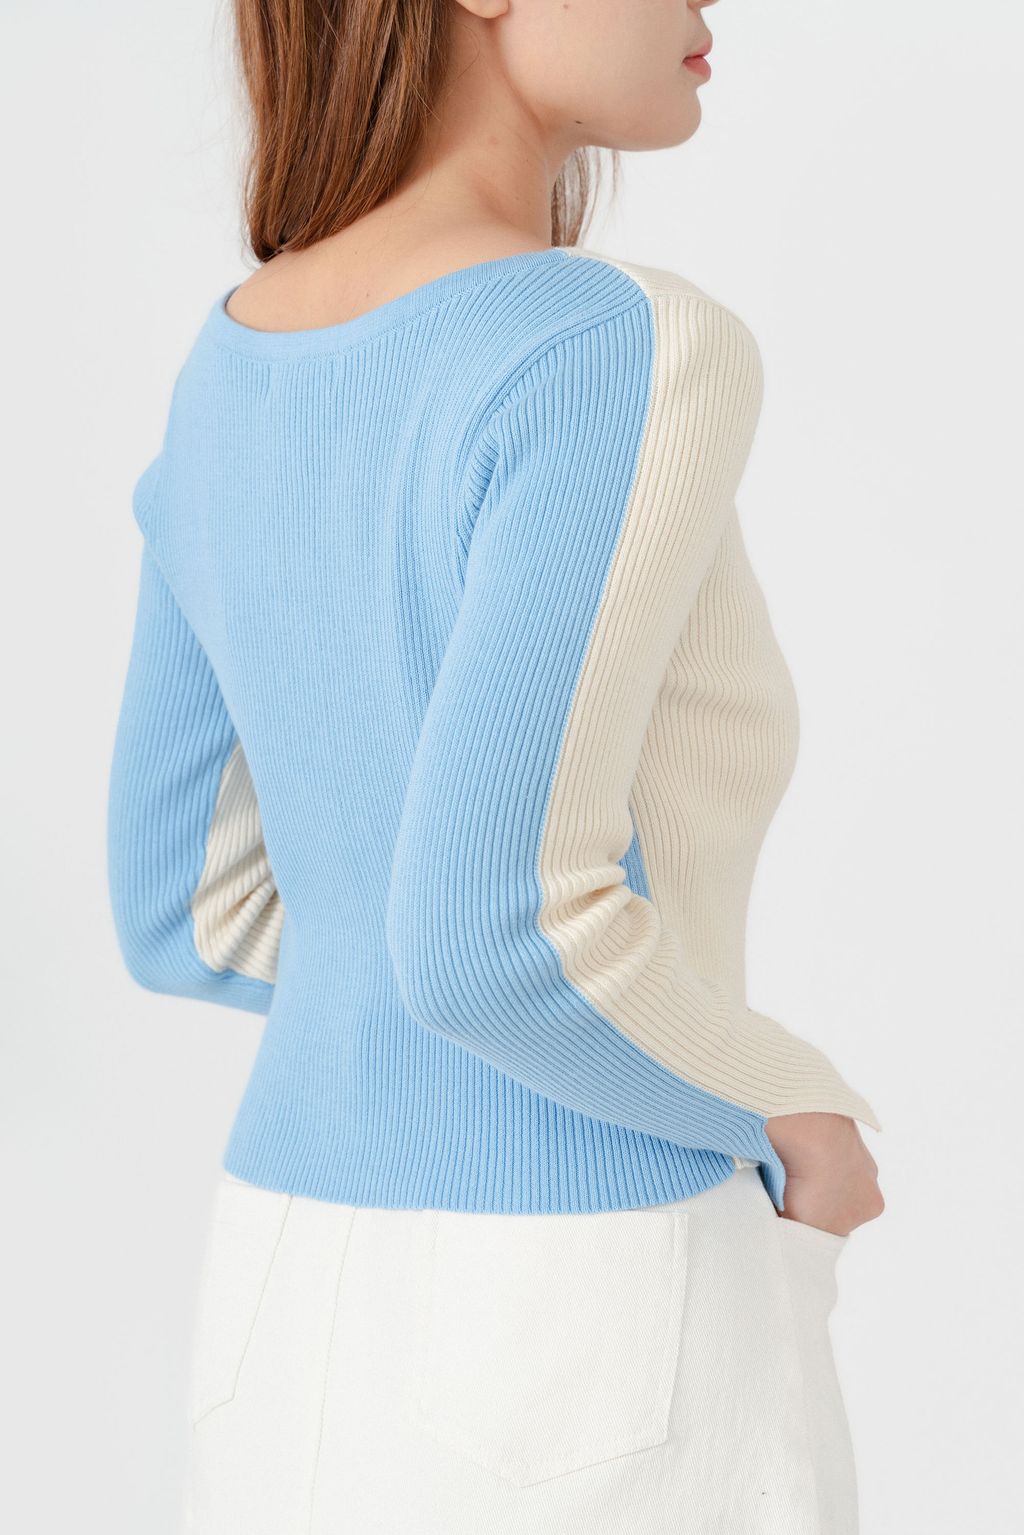 Arvin Double Sided Knit Top5